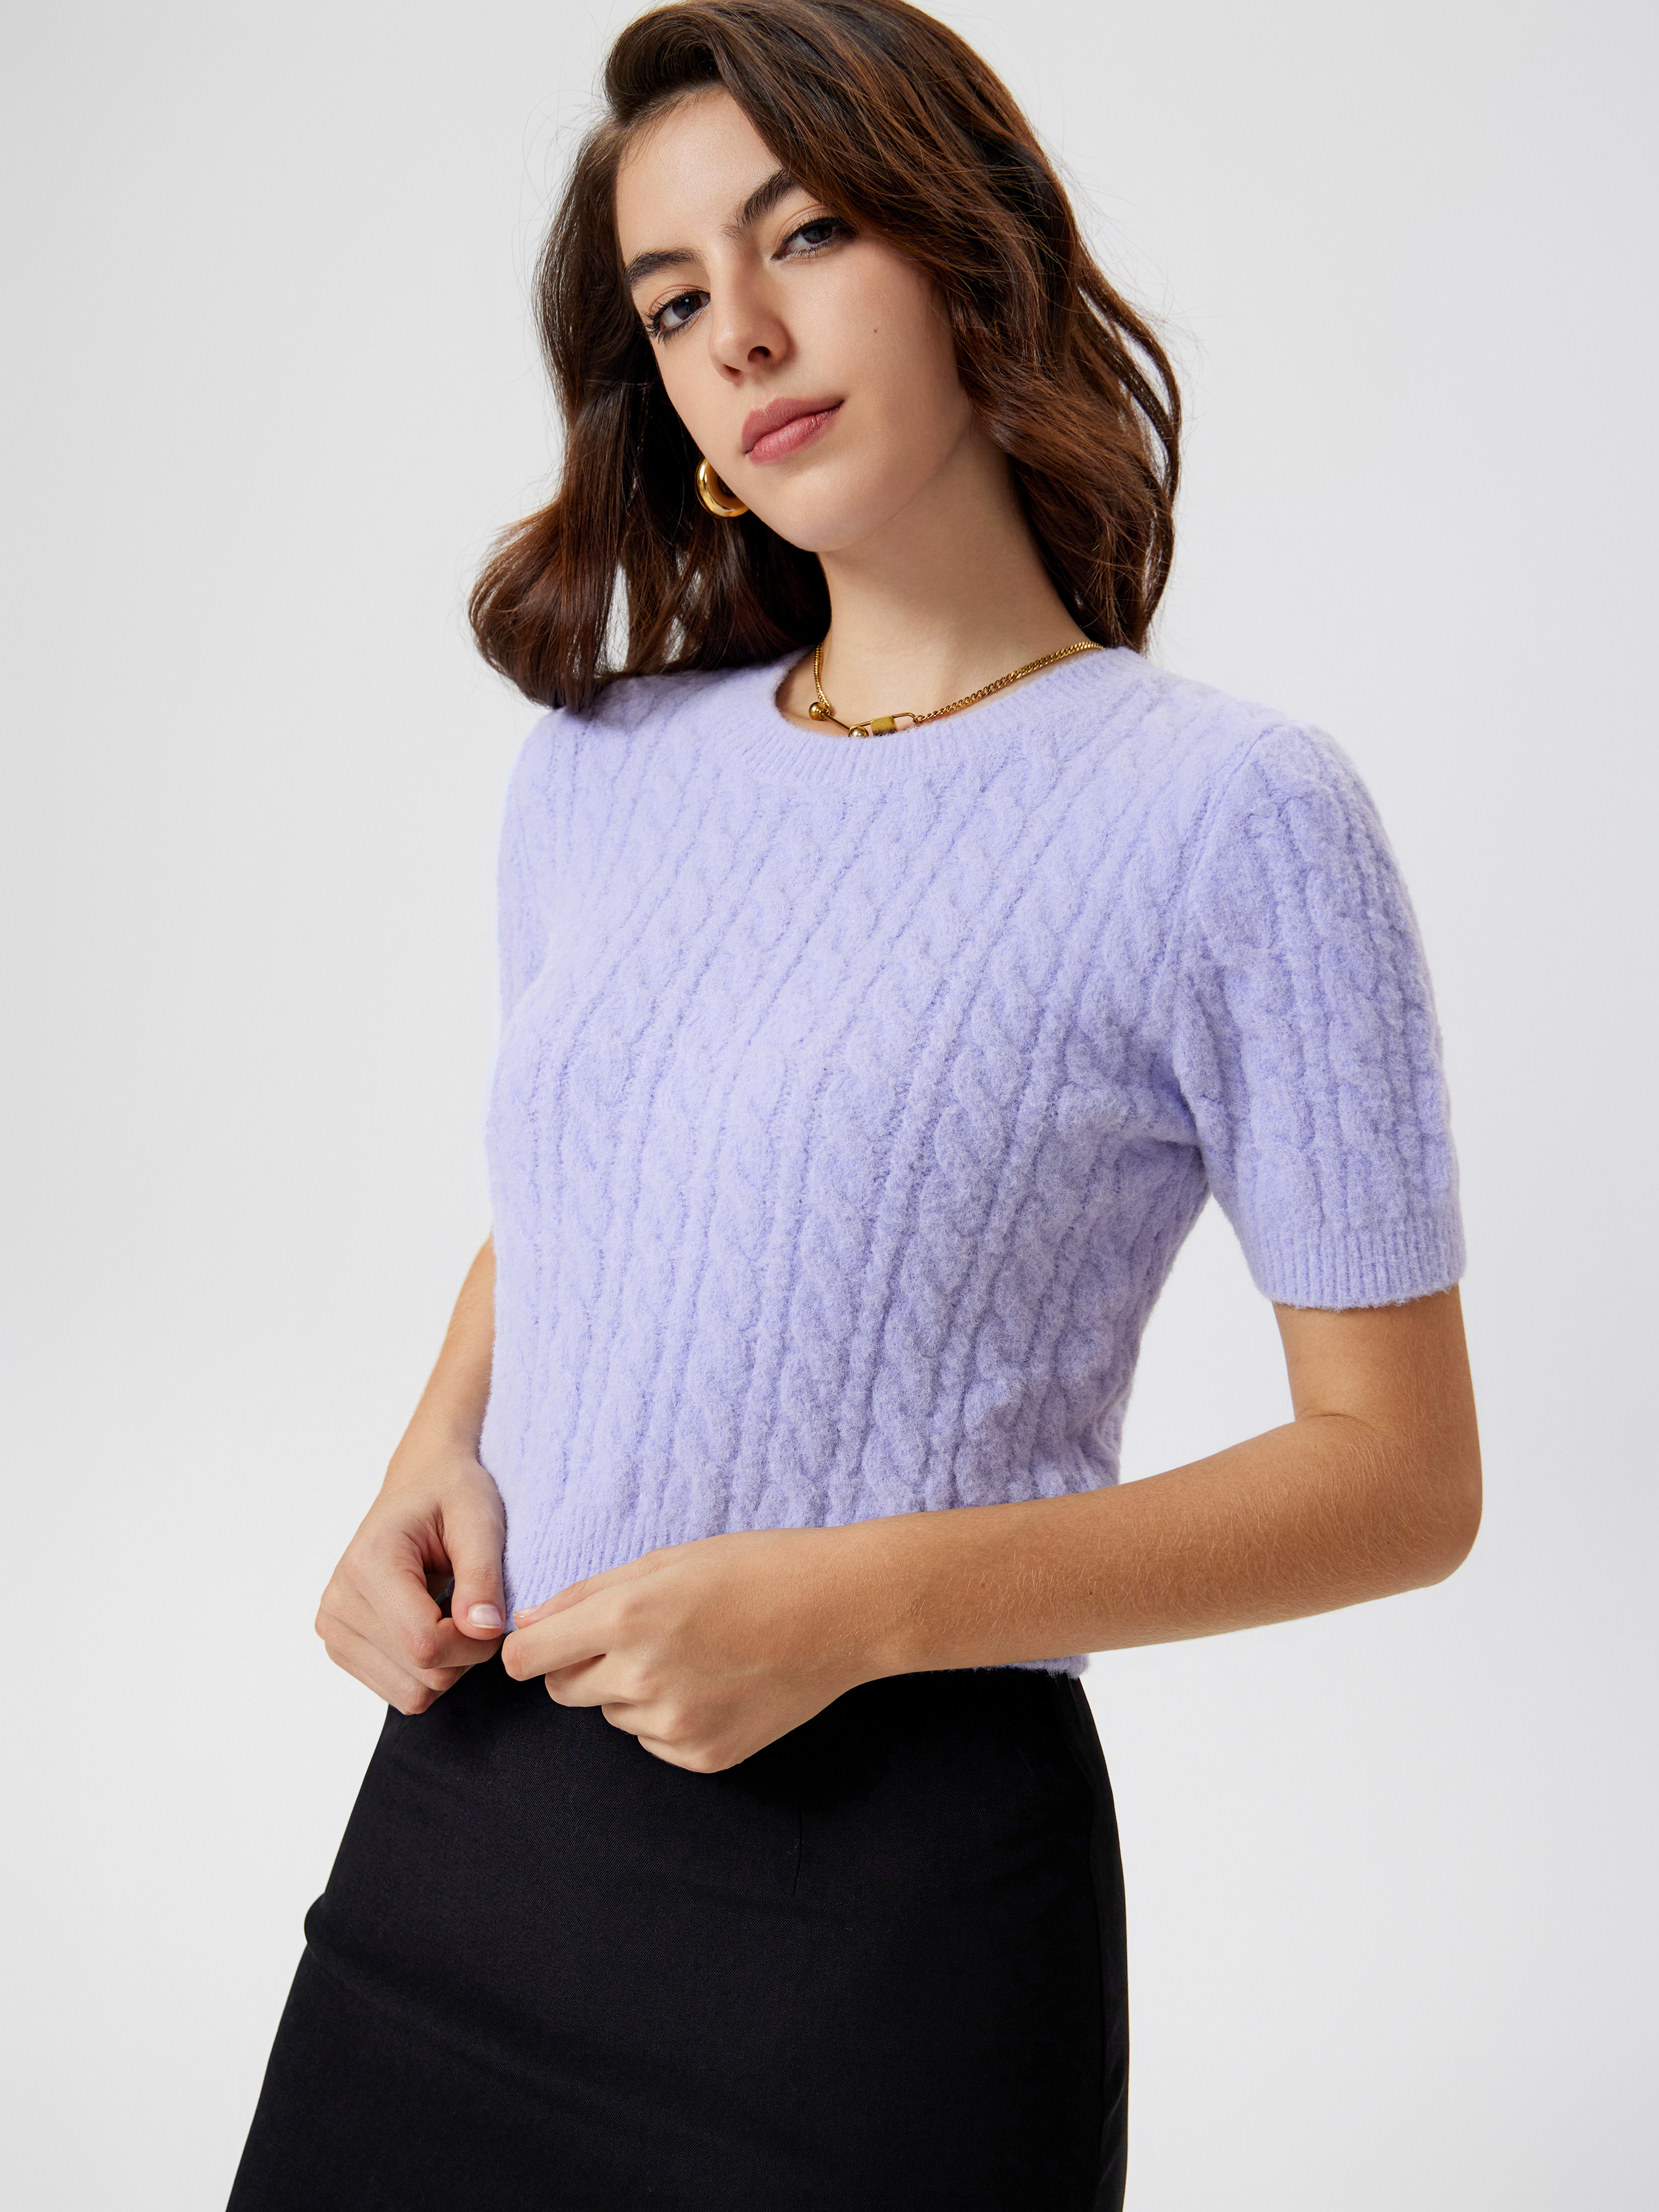 Wool-blend Cable Knit Round Neckline Short Sleeve Top